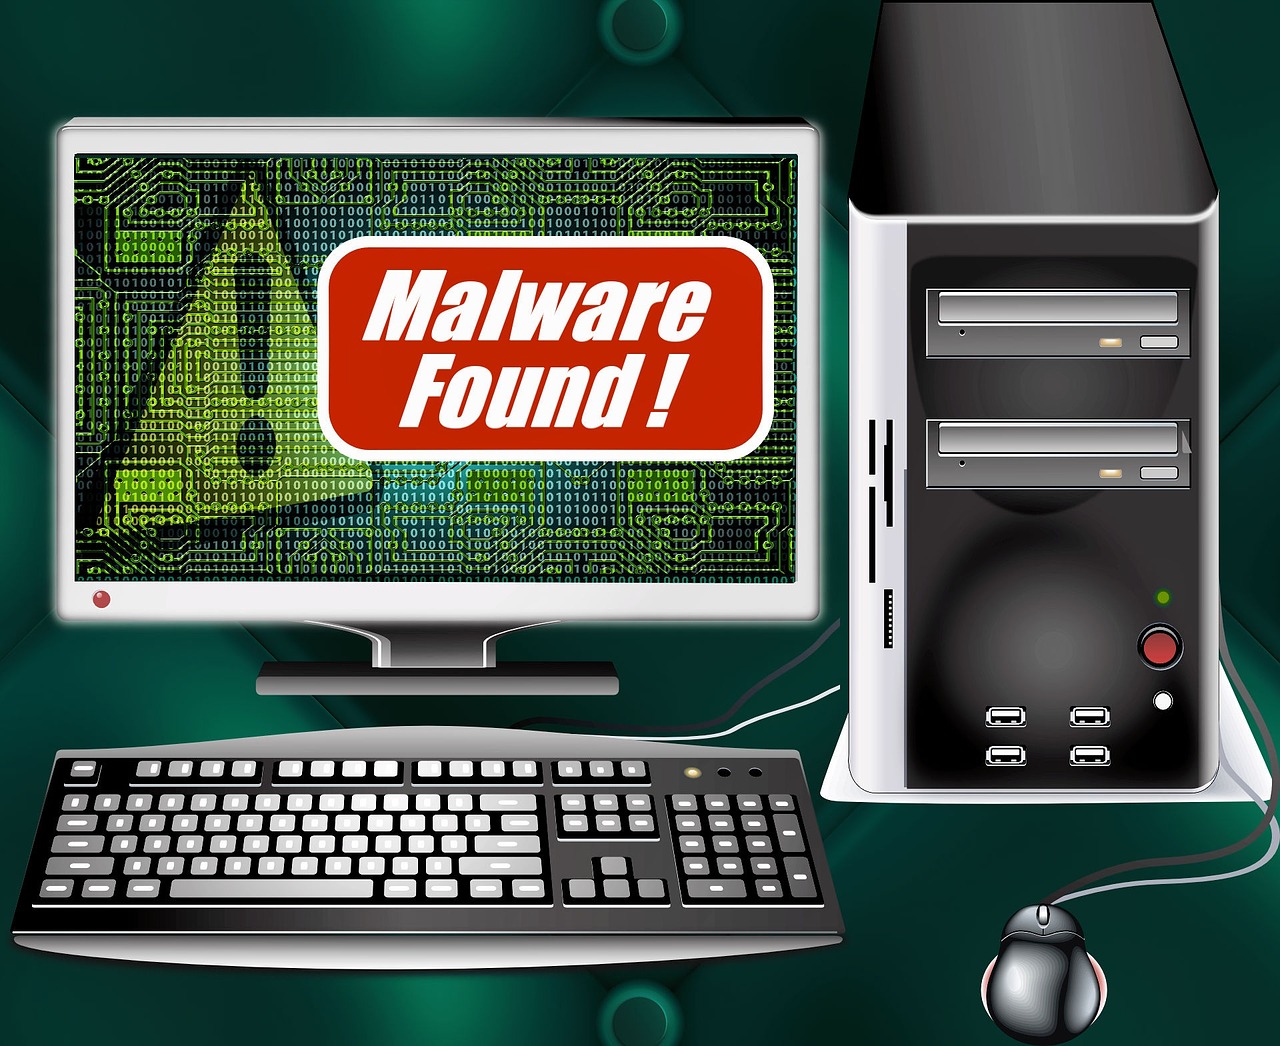 How To Recognize And Avoid A Fake Virus And Malware Warning